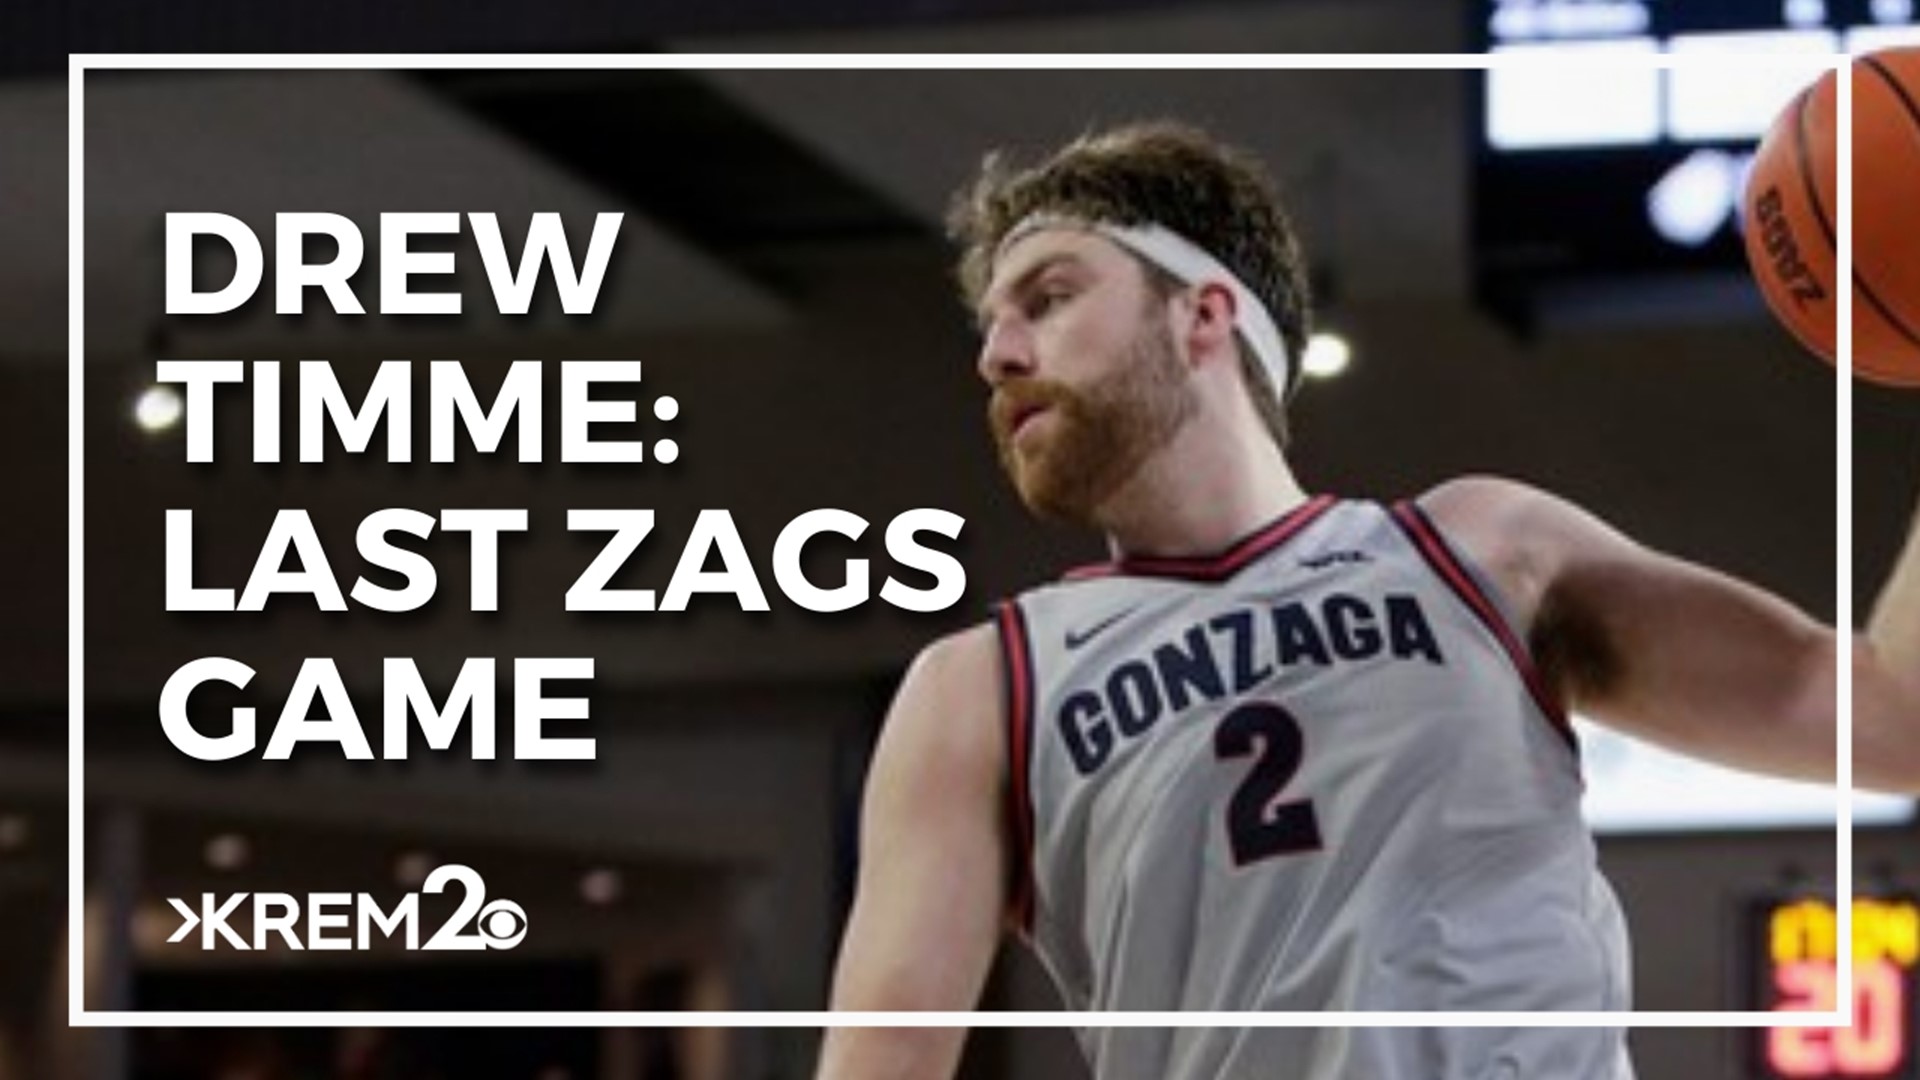 Wednesday night's game kicks off the end of the “Timme Time” era. Drew Timme will play his last home game in The Kennel.